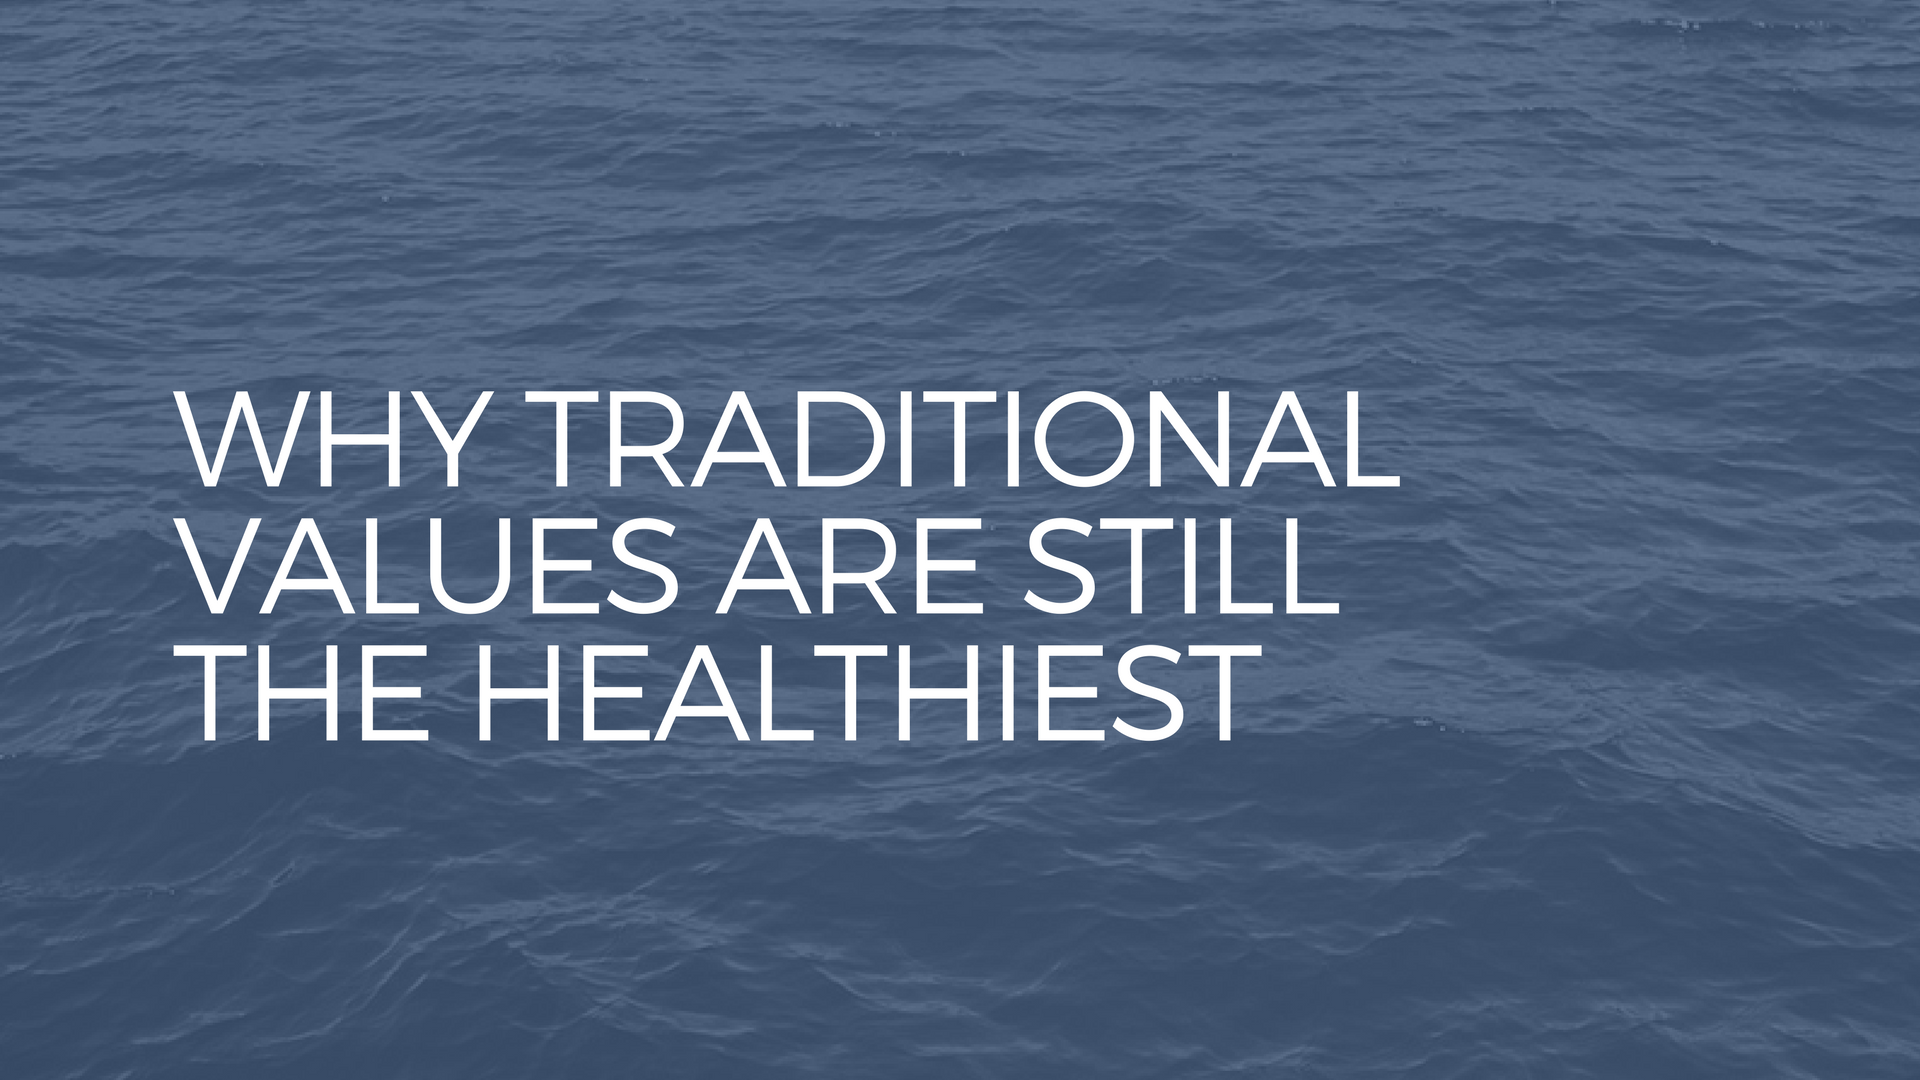 Traditional values are still the healthiest